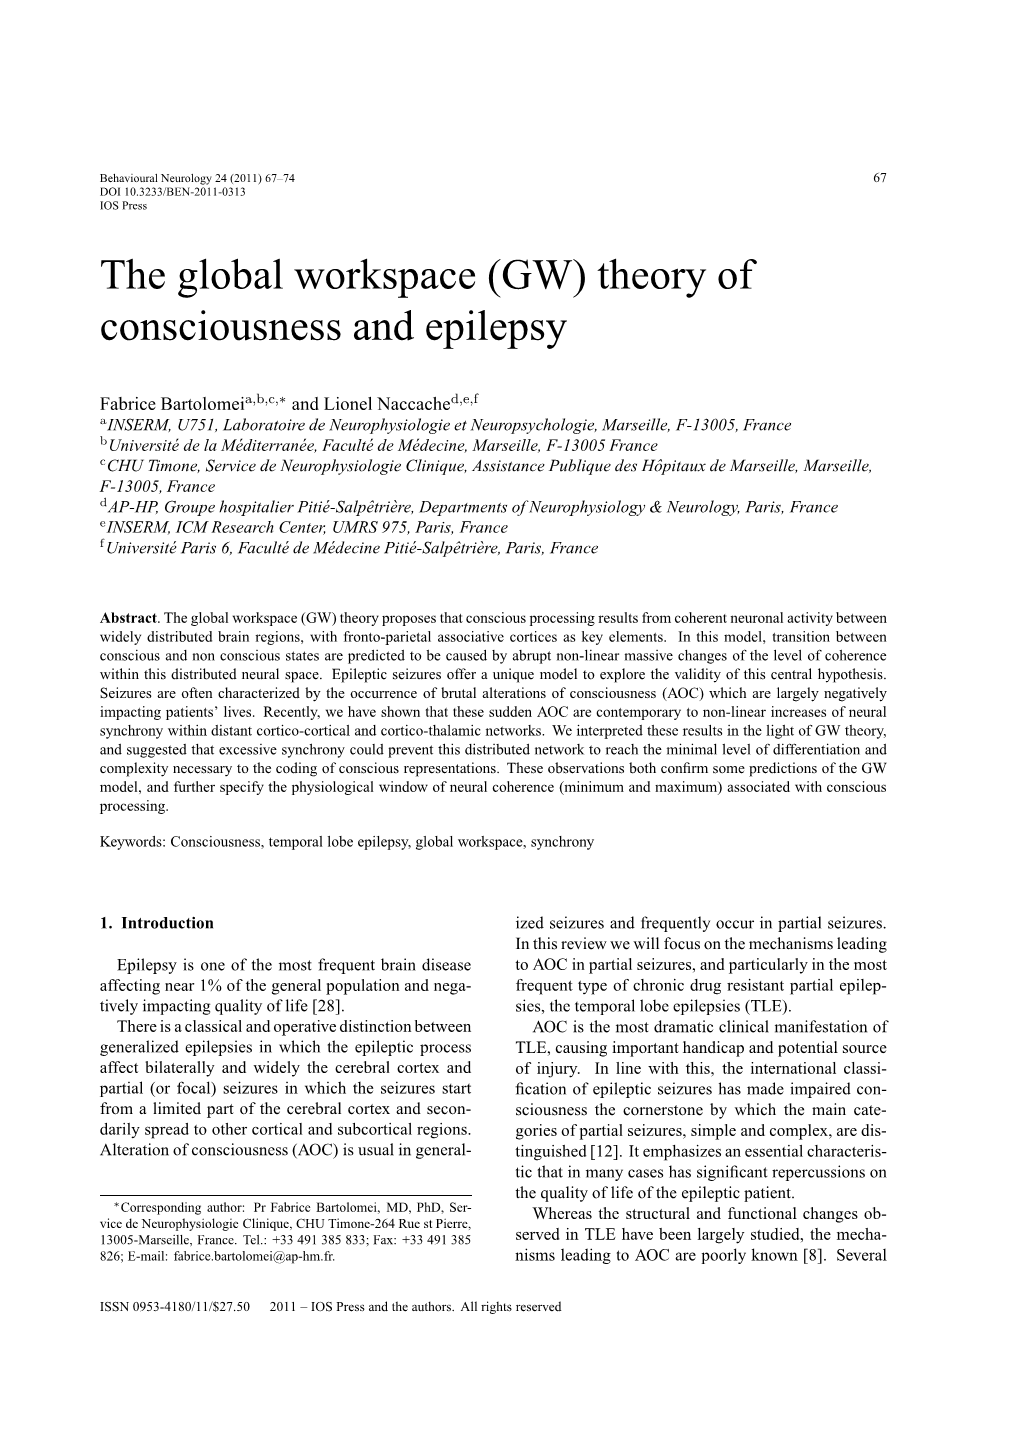 The Global Workspace (GW) Theory of Consciousness and Epilepsy